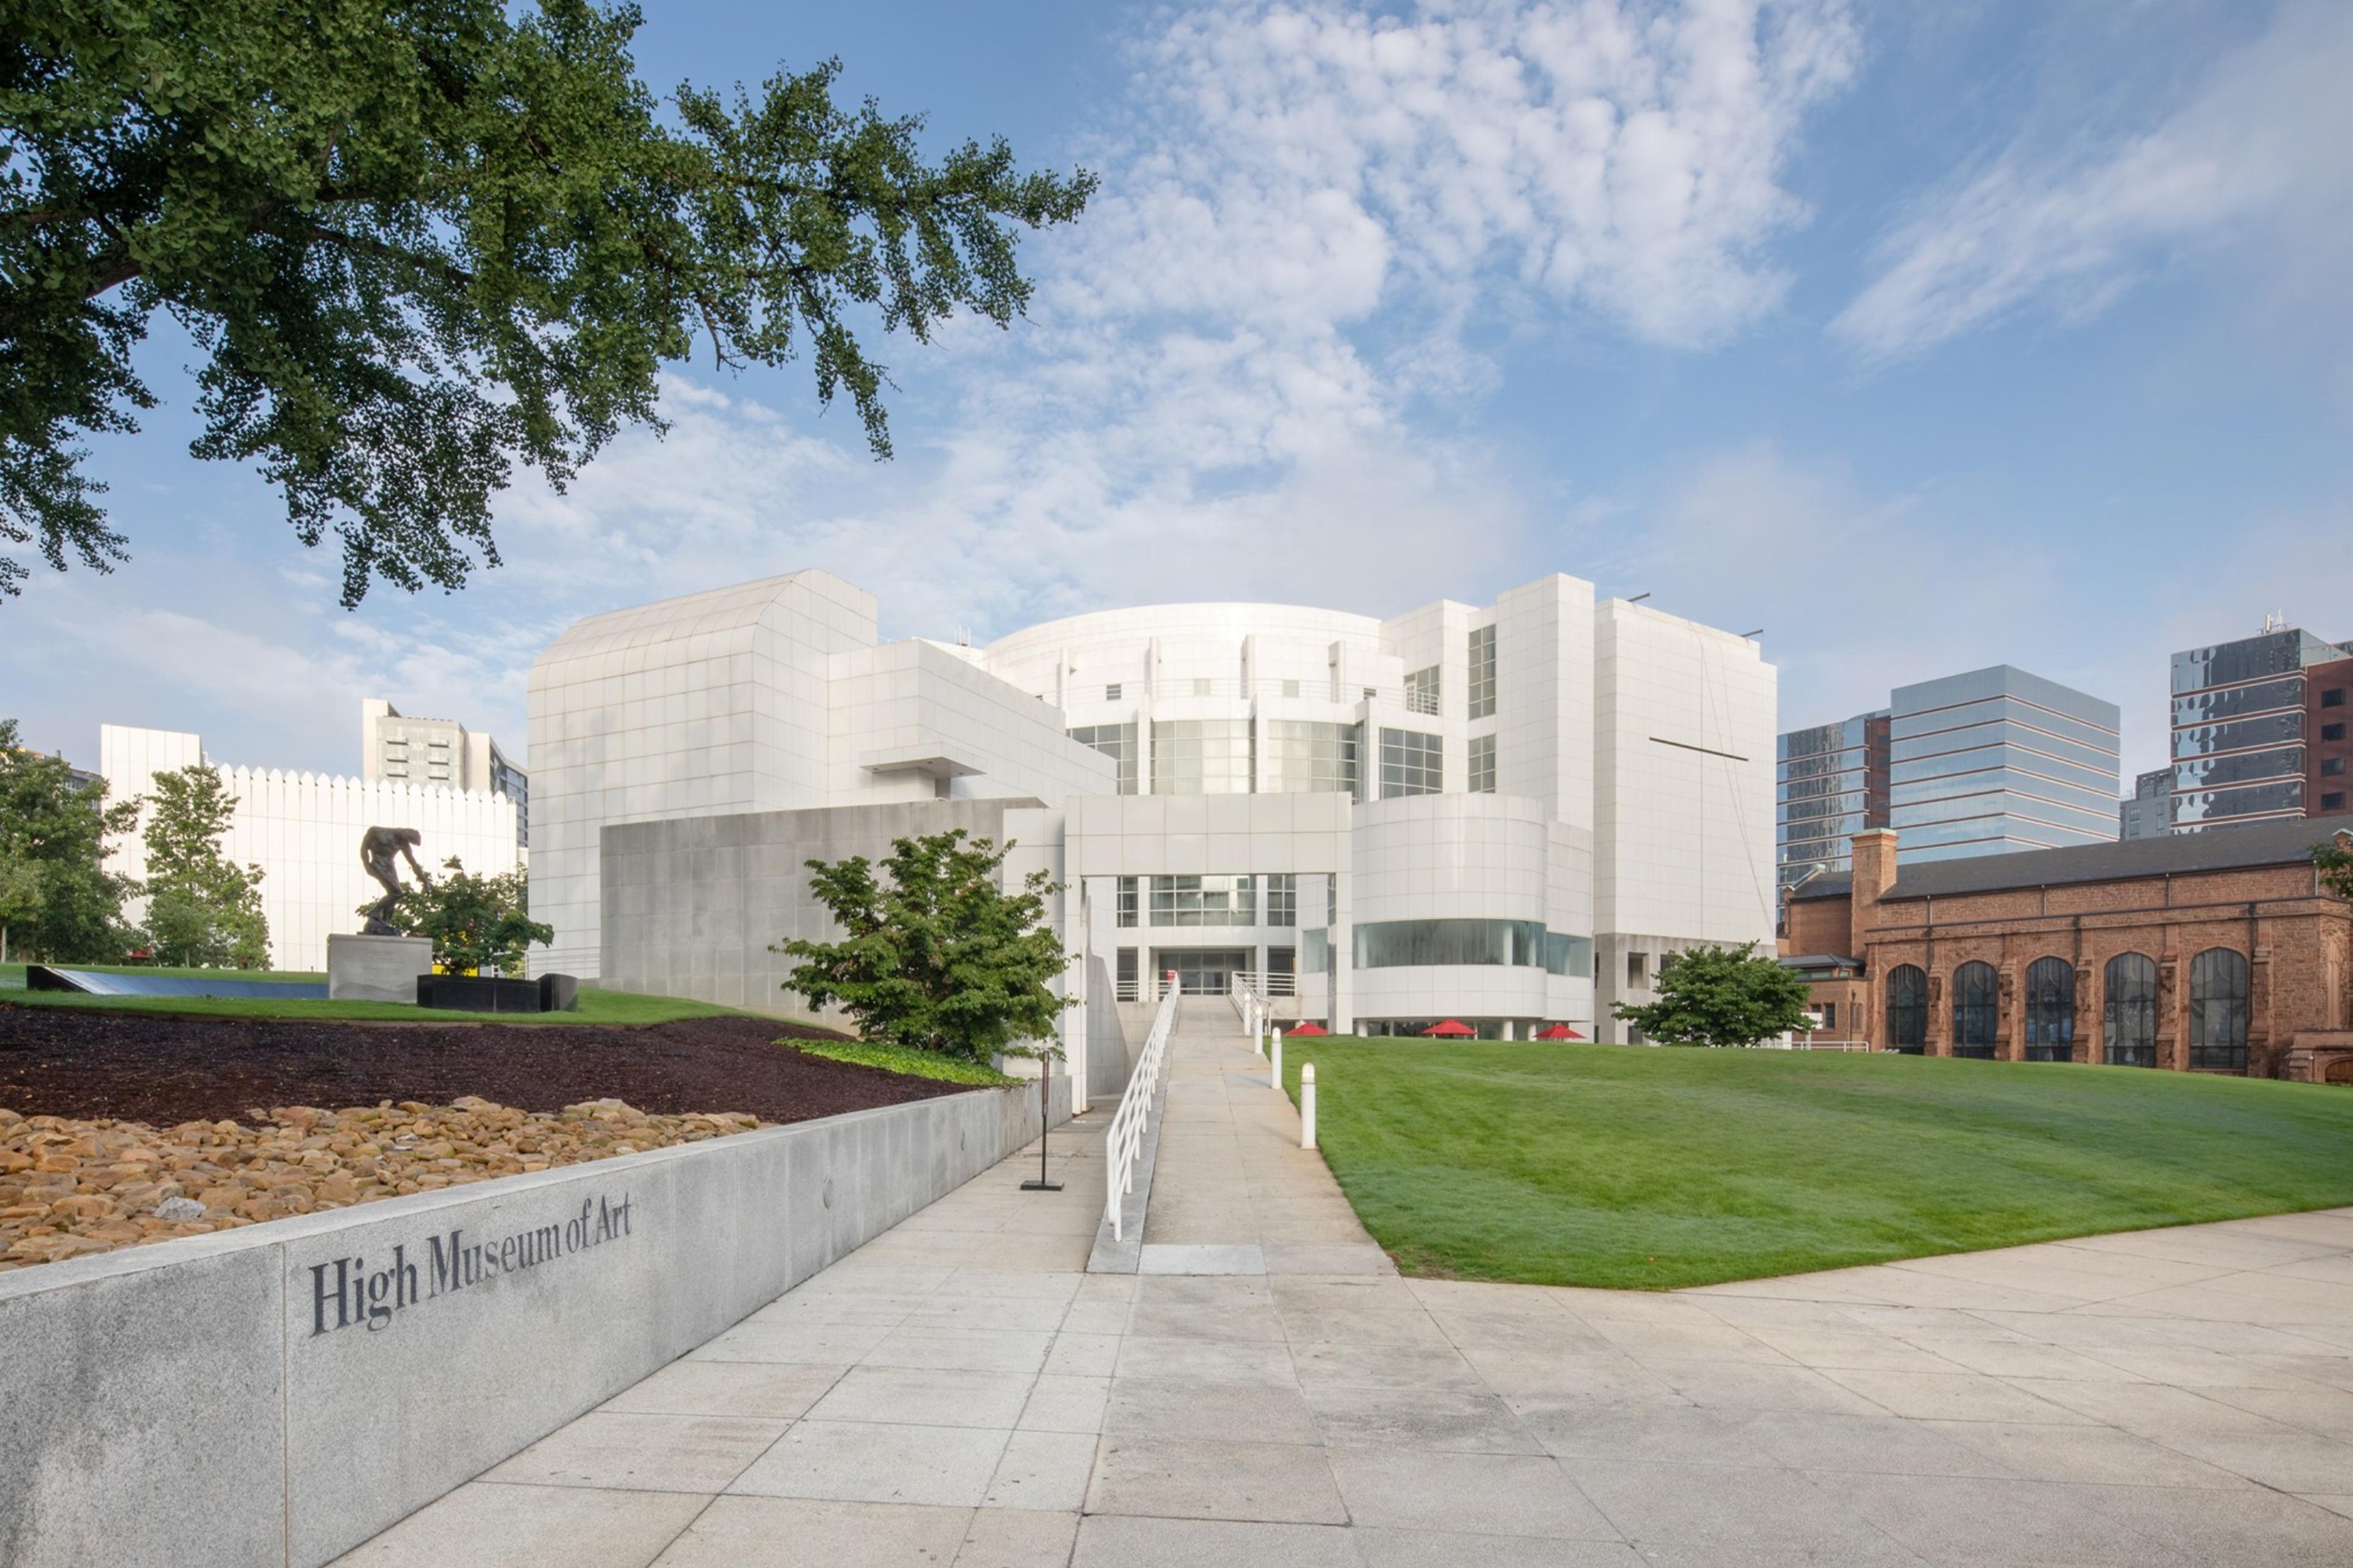 High Museum of Art at The Woodruff Arts Center Campus